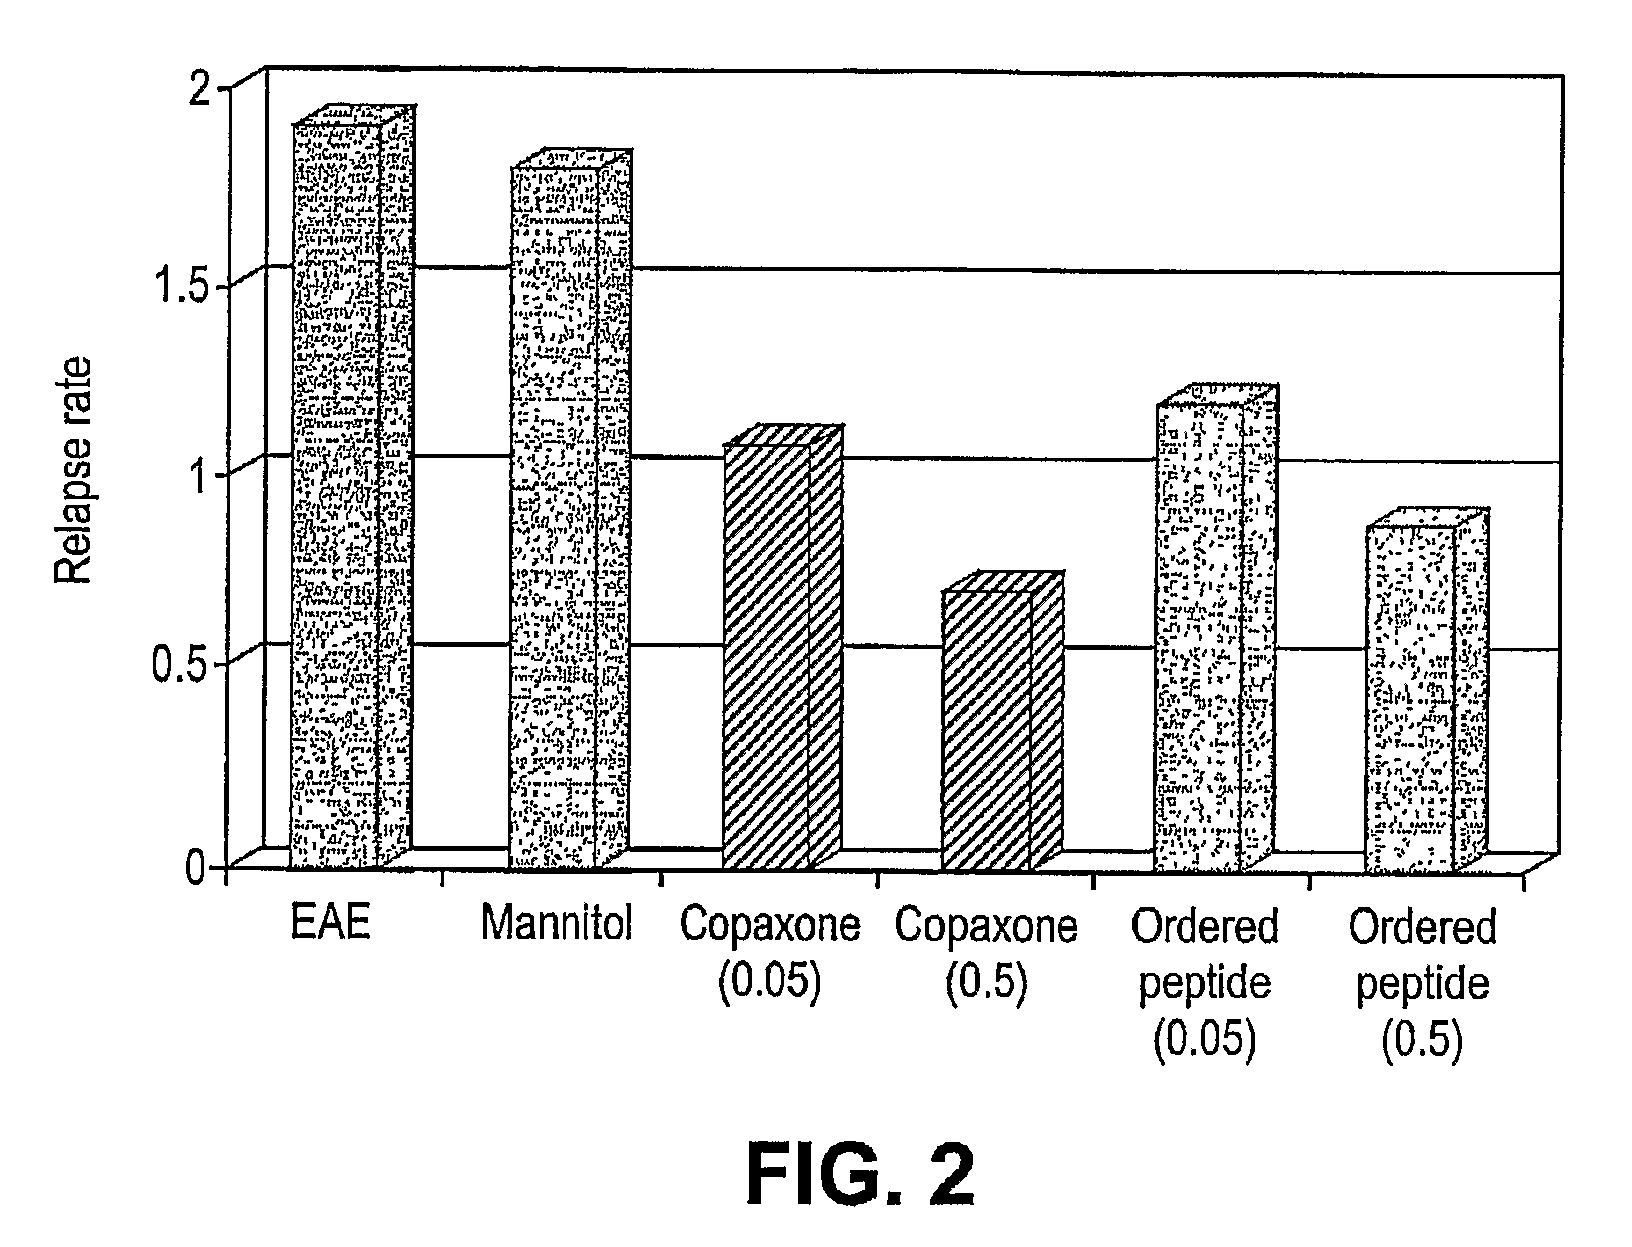 Treatment of demyelinating autoimmune disease with modified ordered peptides